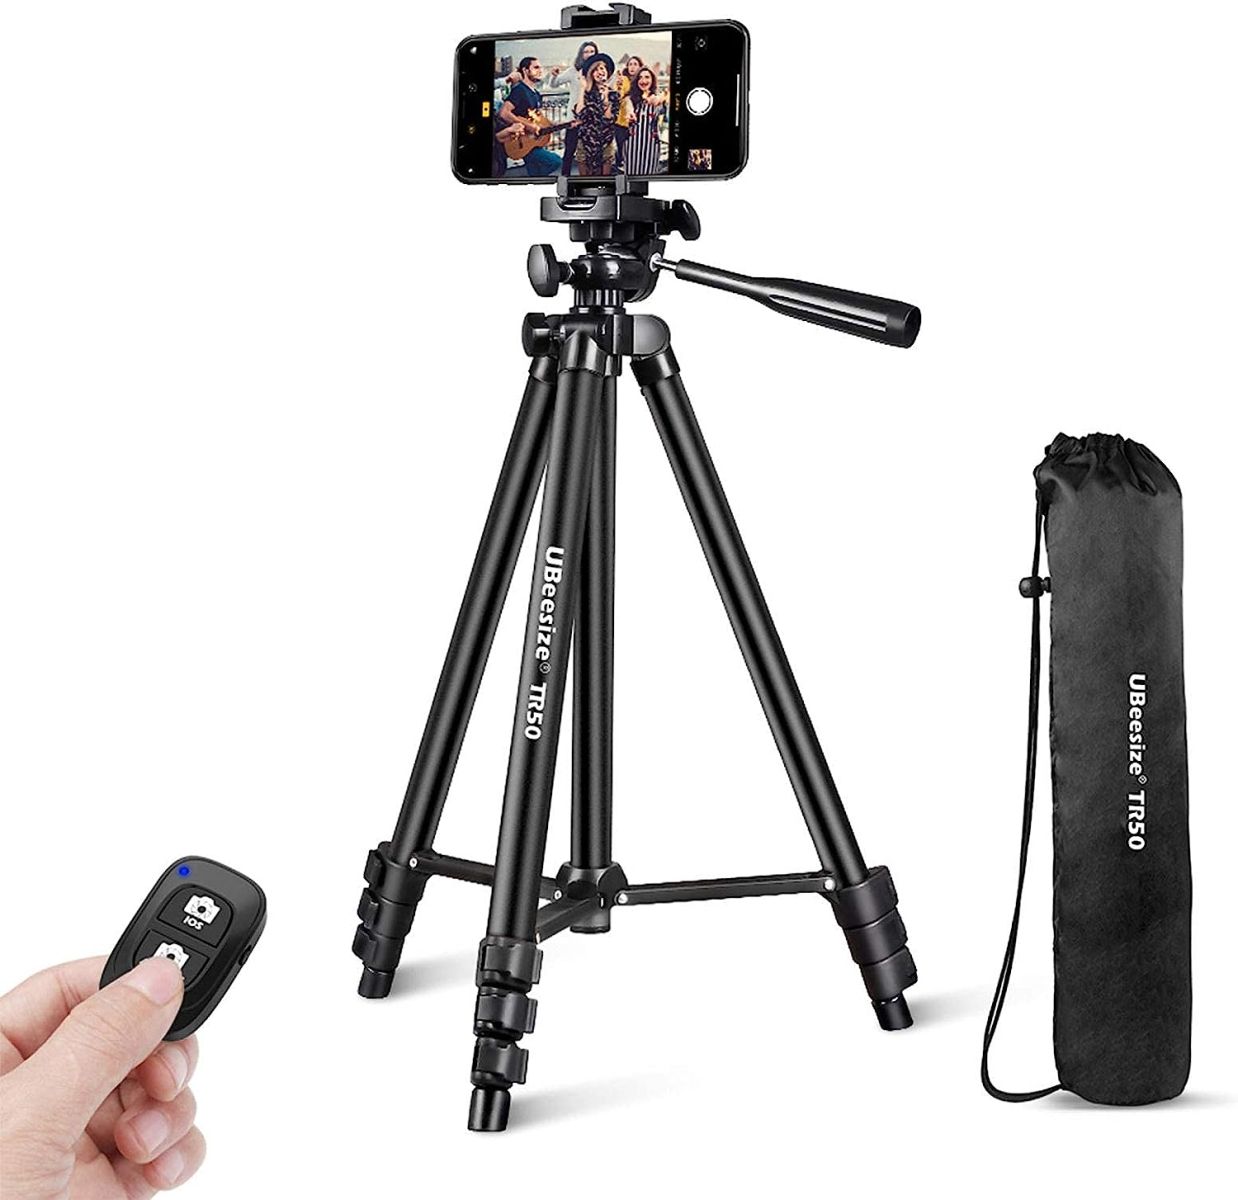 UBeesize Phone Tripod, 51" Adjustable Travel Video Tripod Stand & Phone Holder, Dimmable Desk Makeup Ring Light, Perfect for Live Streaming, YouTube Videos, and Photography